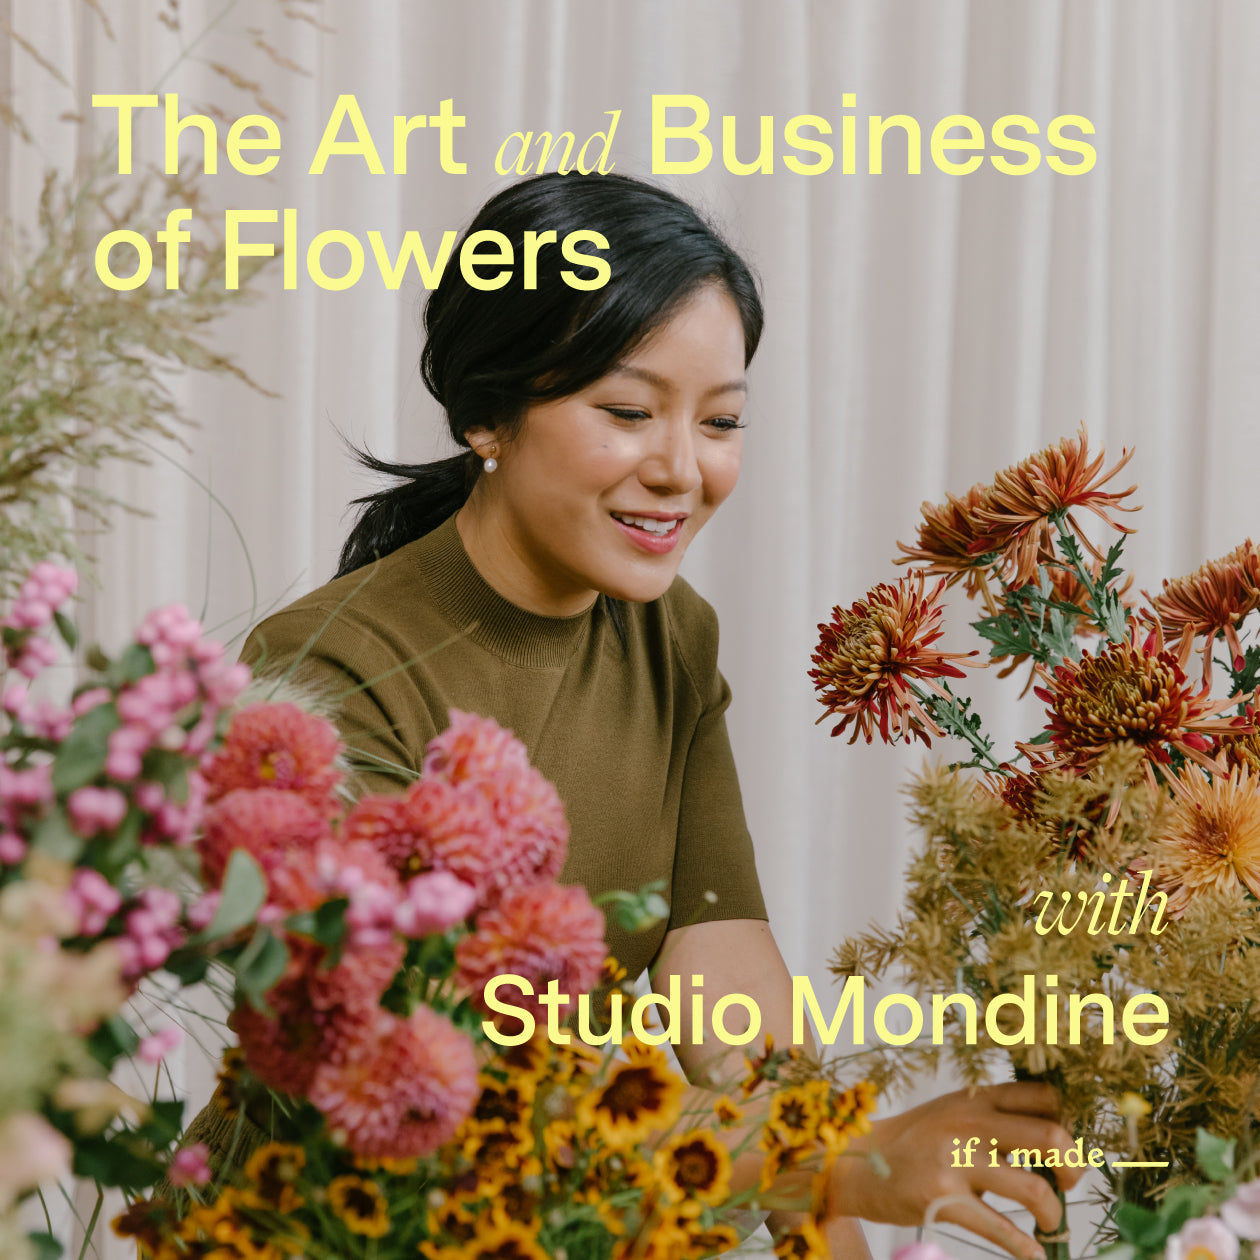 The Art and Business of Flowers with Studio Mondine (RPP) -  29 payments of $149